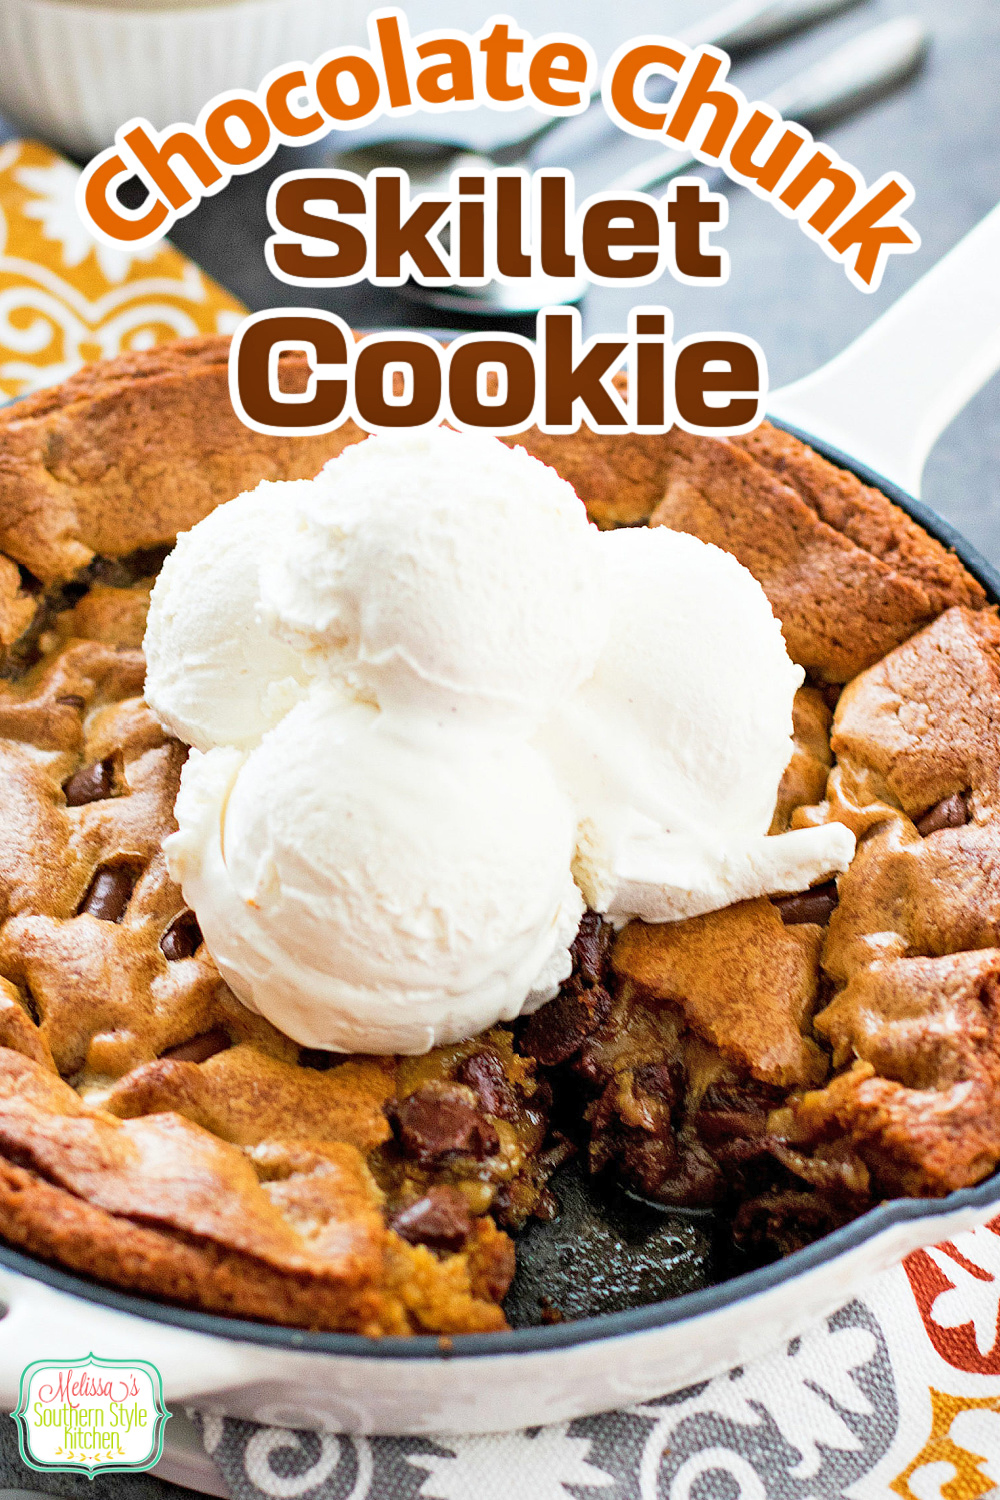 Top this gooey Chocolate Chunk Skillet Cookie with vanilla ice cream and a drizzle of chocolate ganache for the finish #chocolatechunkcookies #chocolatechunkskilletcookie #cookieskilletrecipes #chocolate #desserts #dessertfoodrecipes #cookierecipes #southernfood #southernrecipes via @melissasssk